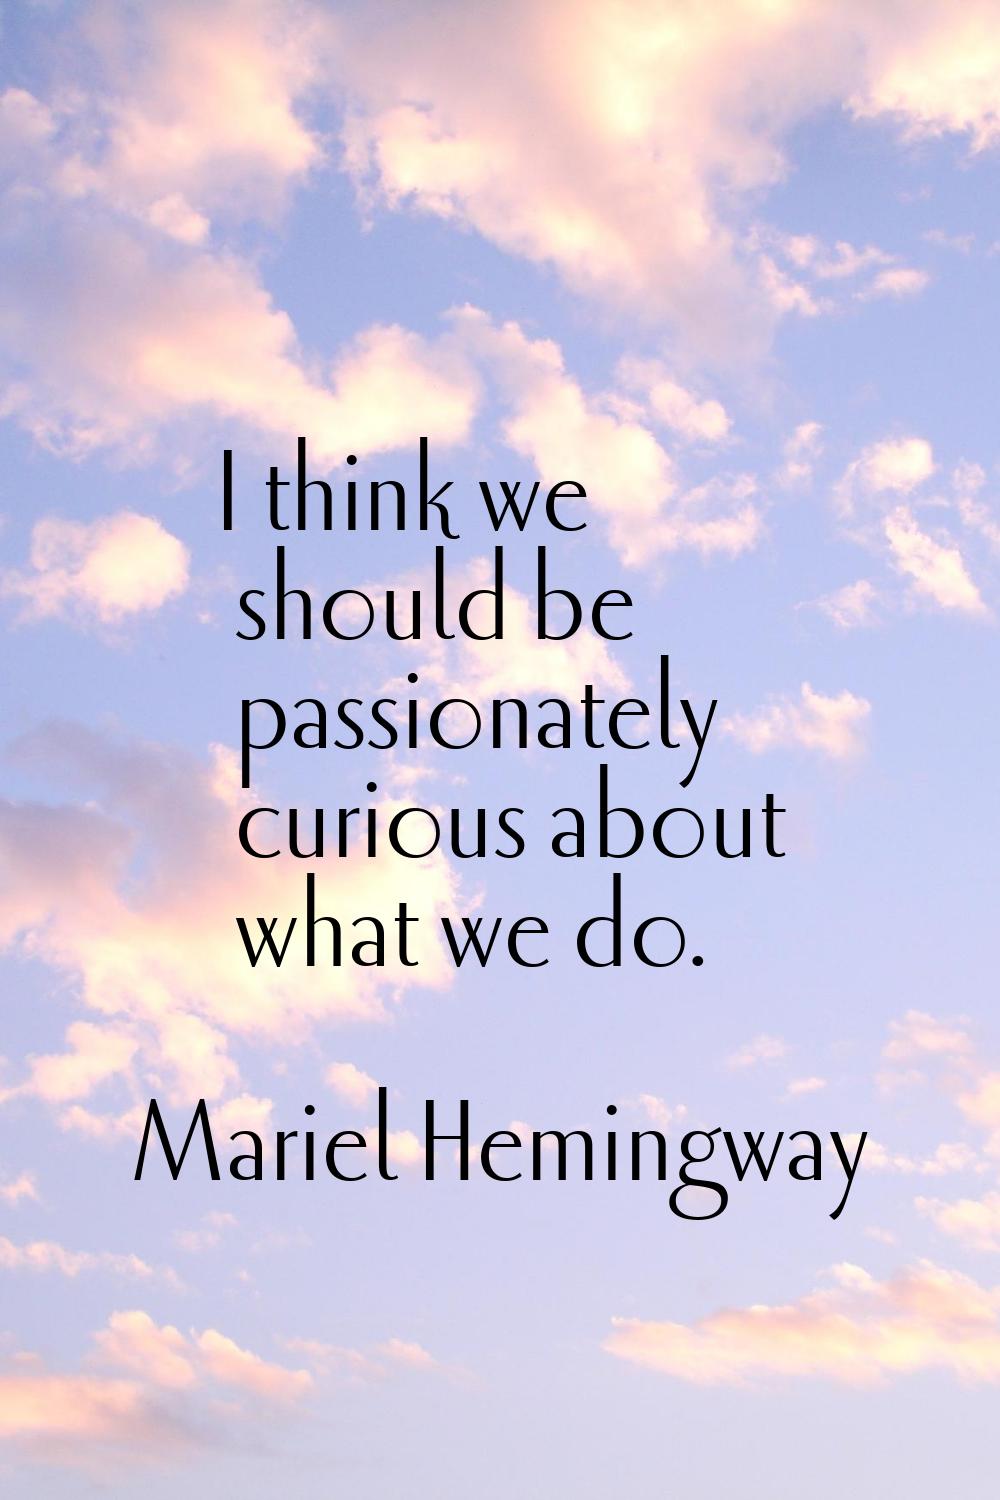 I think we should be passionately curious about what we do.